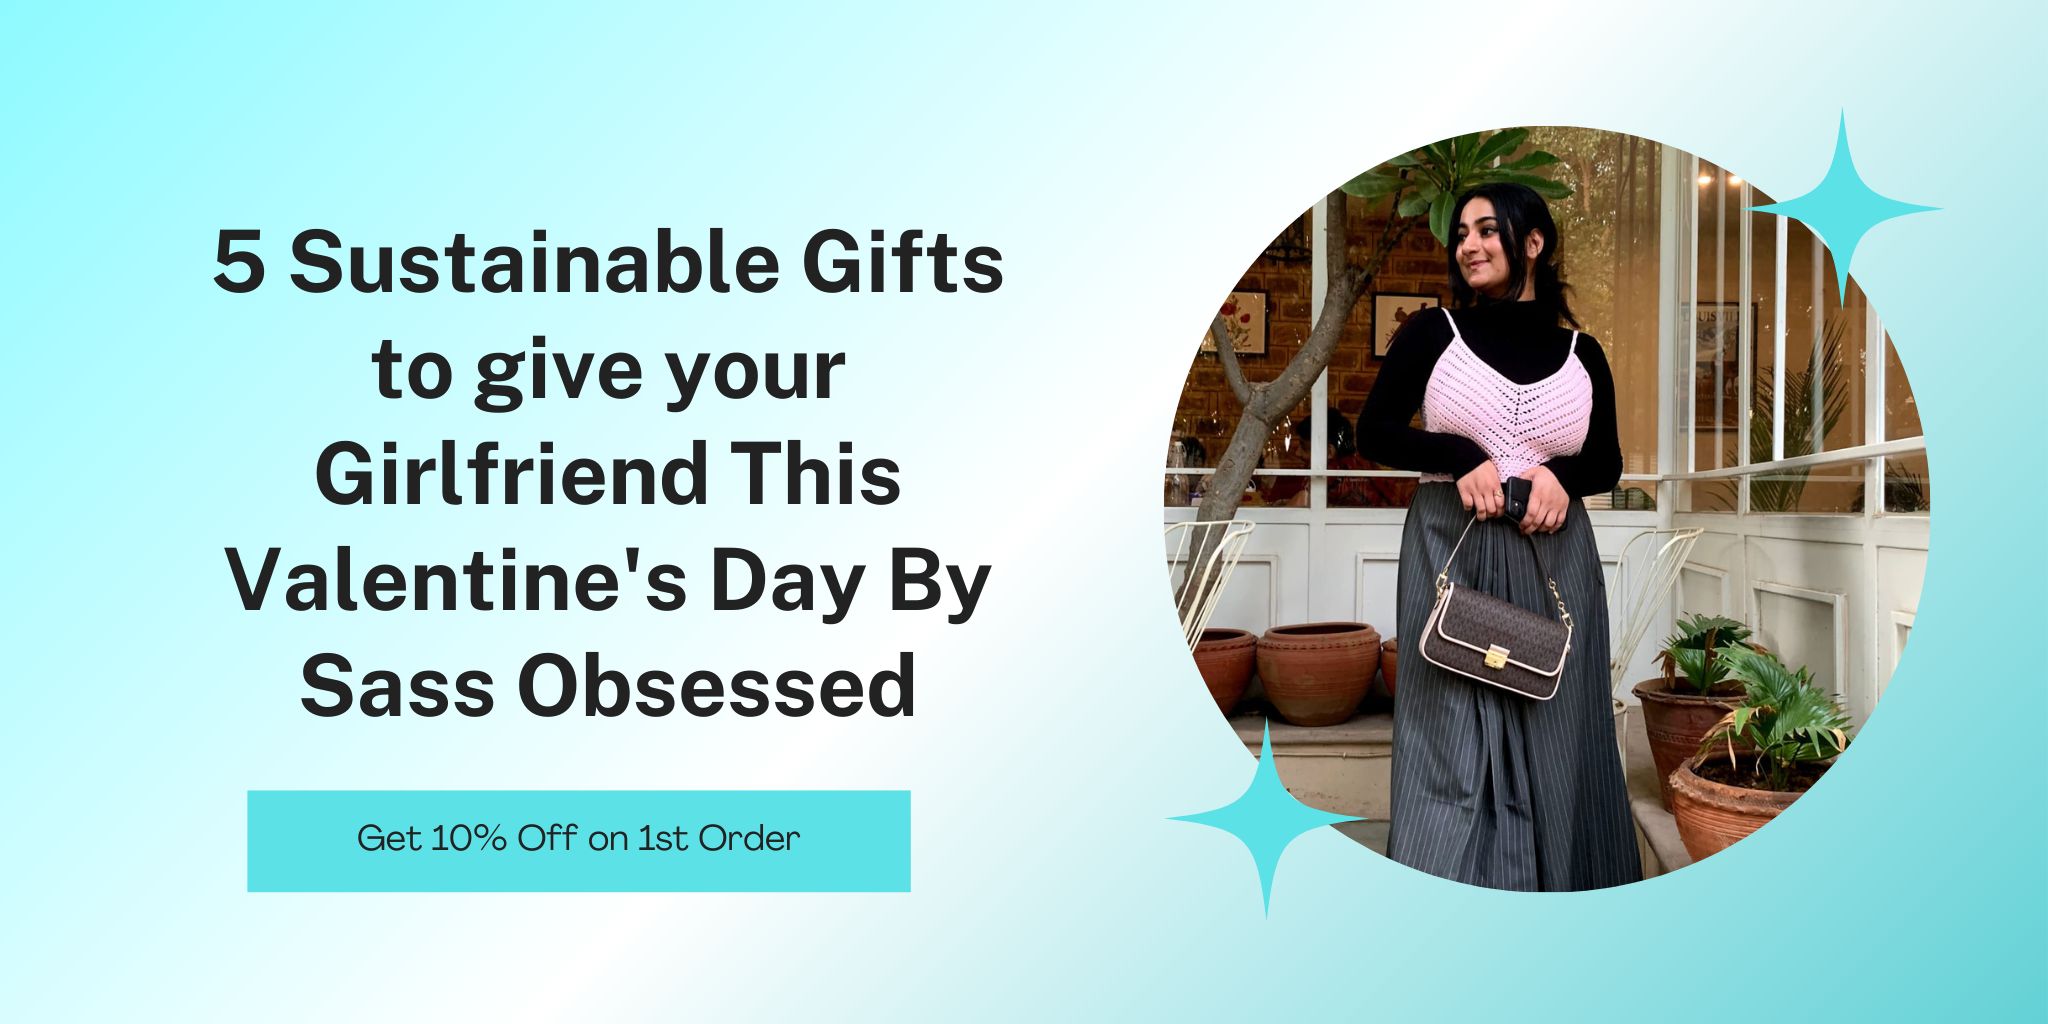 5 Sustainable Gifts to give your Girlfriend This Valentine's Day By Sass Obsessed